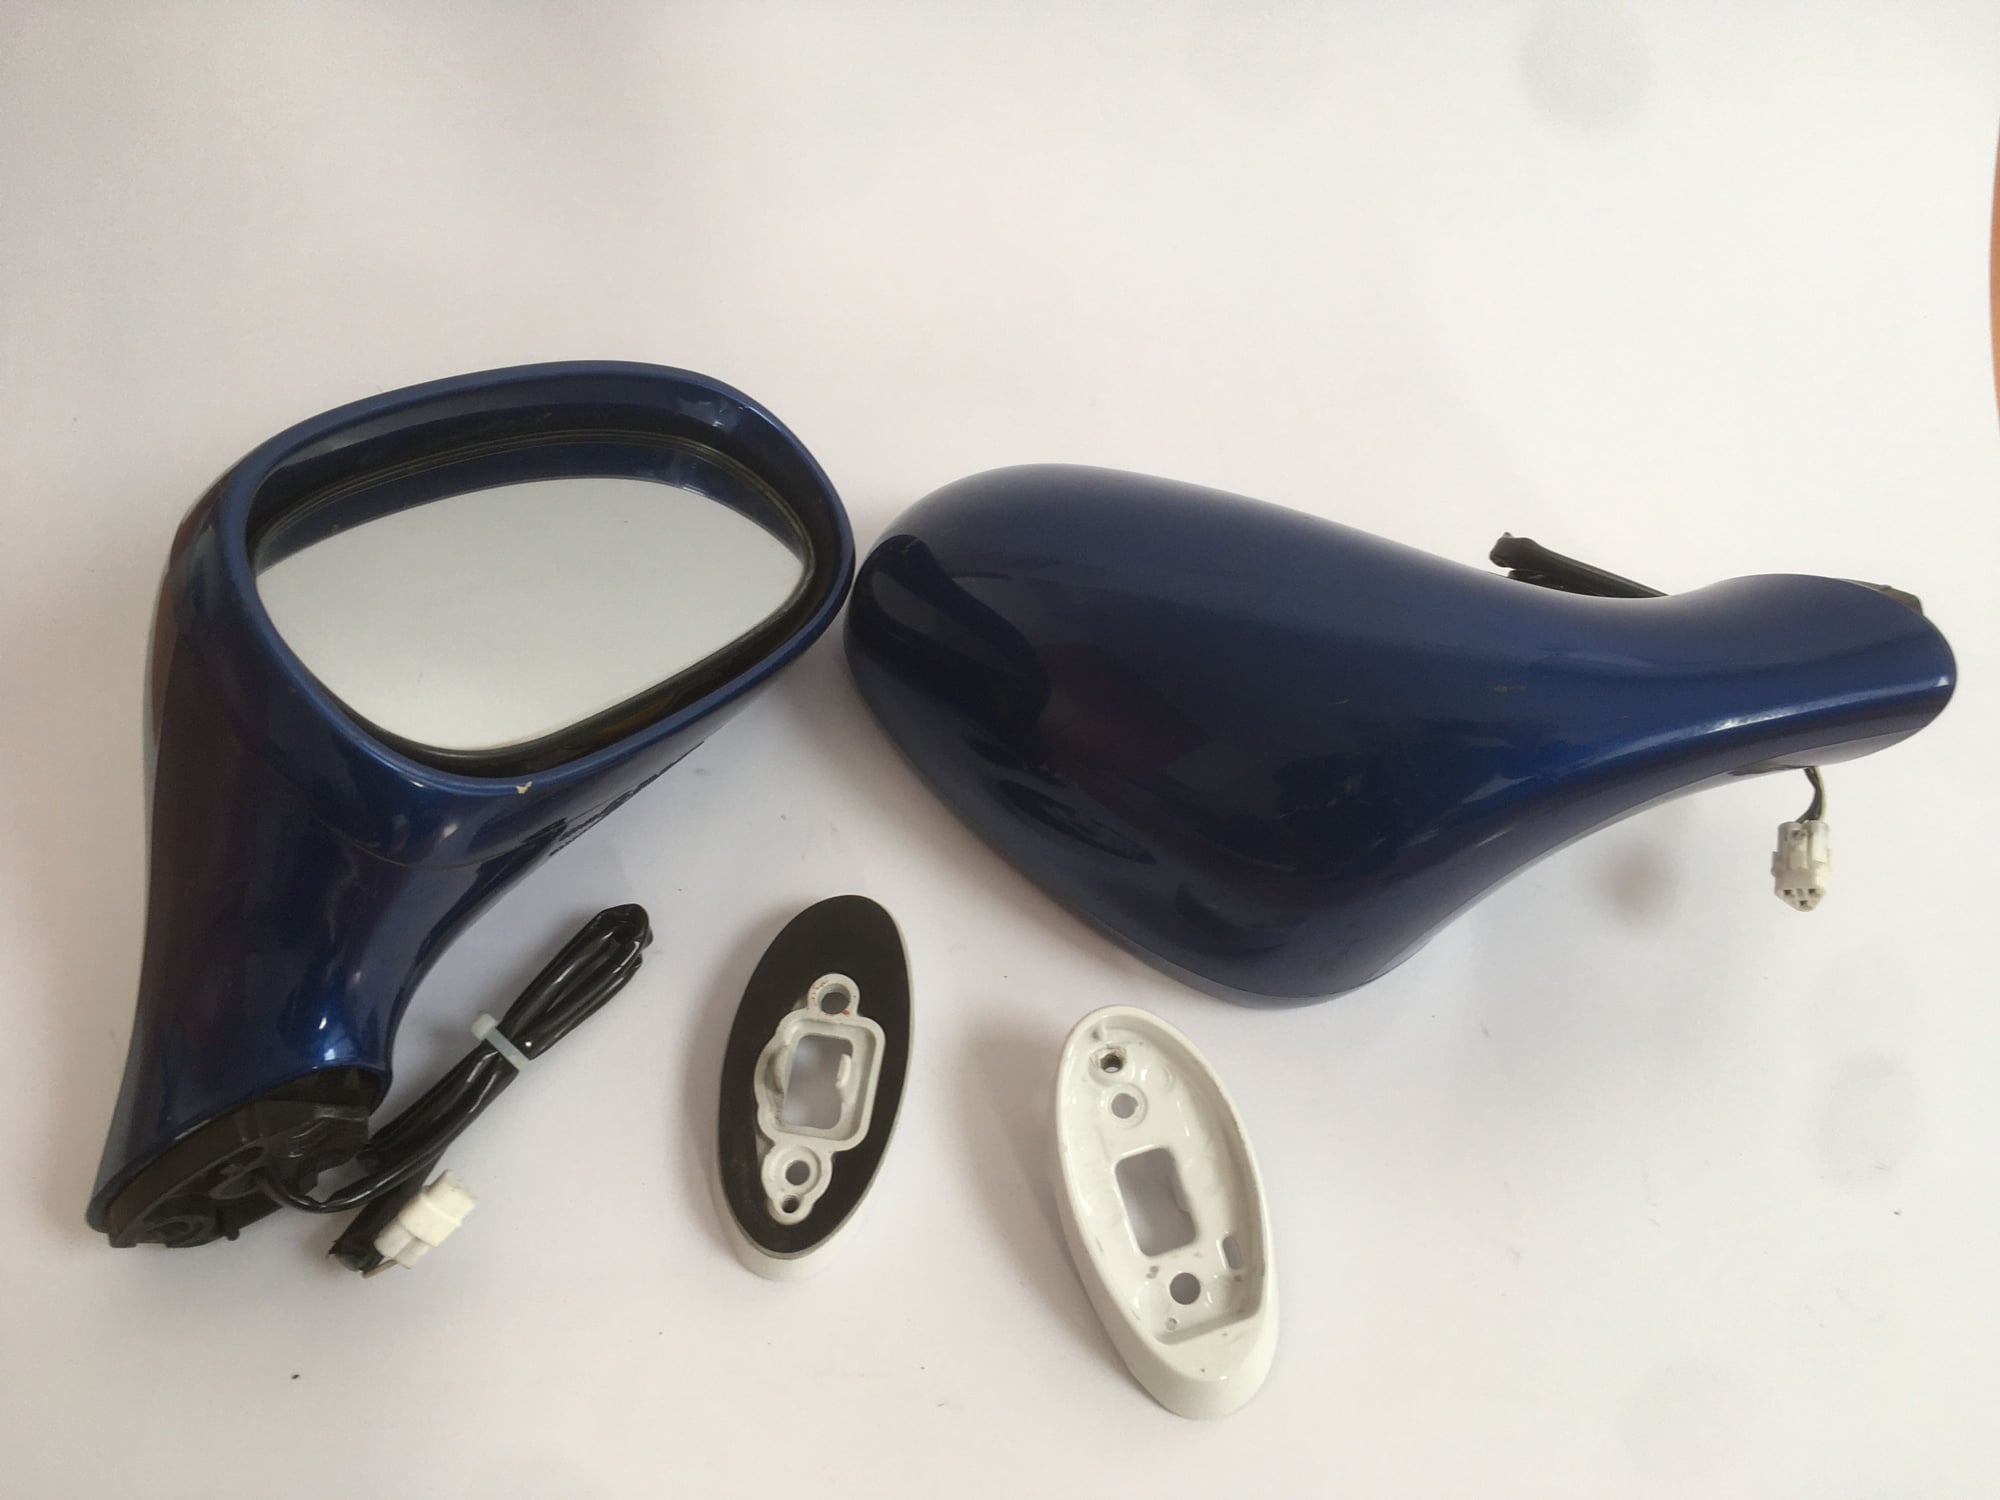 Exterior Body Parts - FD Side mirrors with the base plates - Used - 1993 to 2002 Mazda RX-7 - Split, Croatia